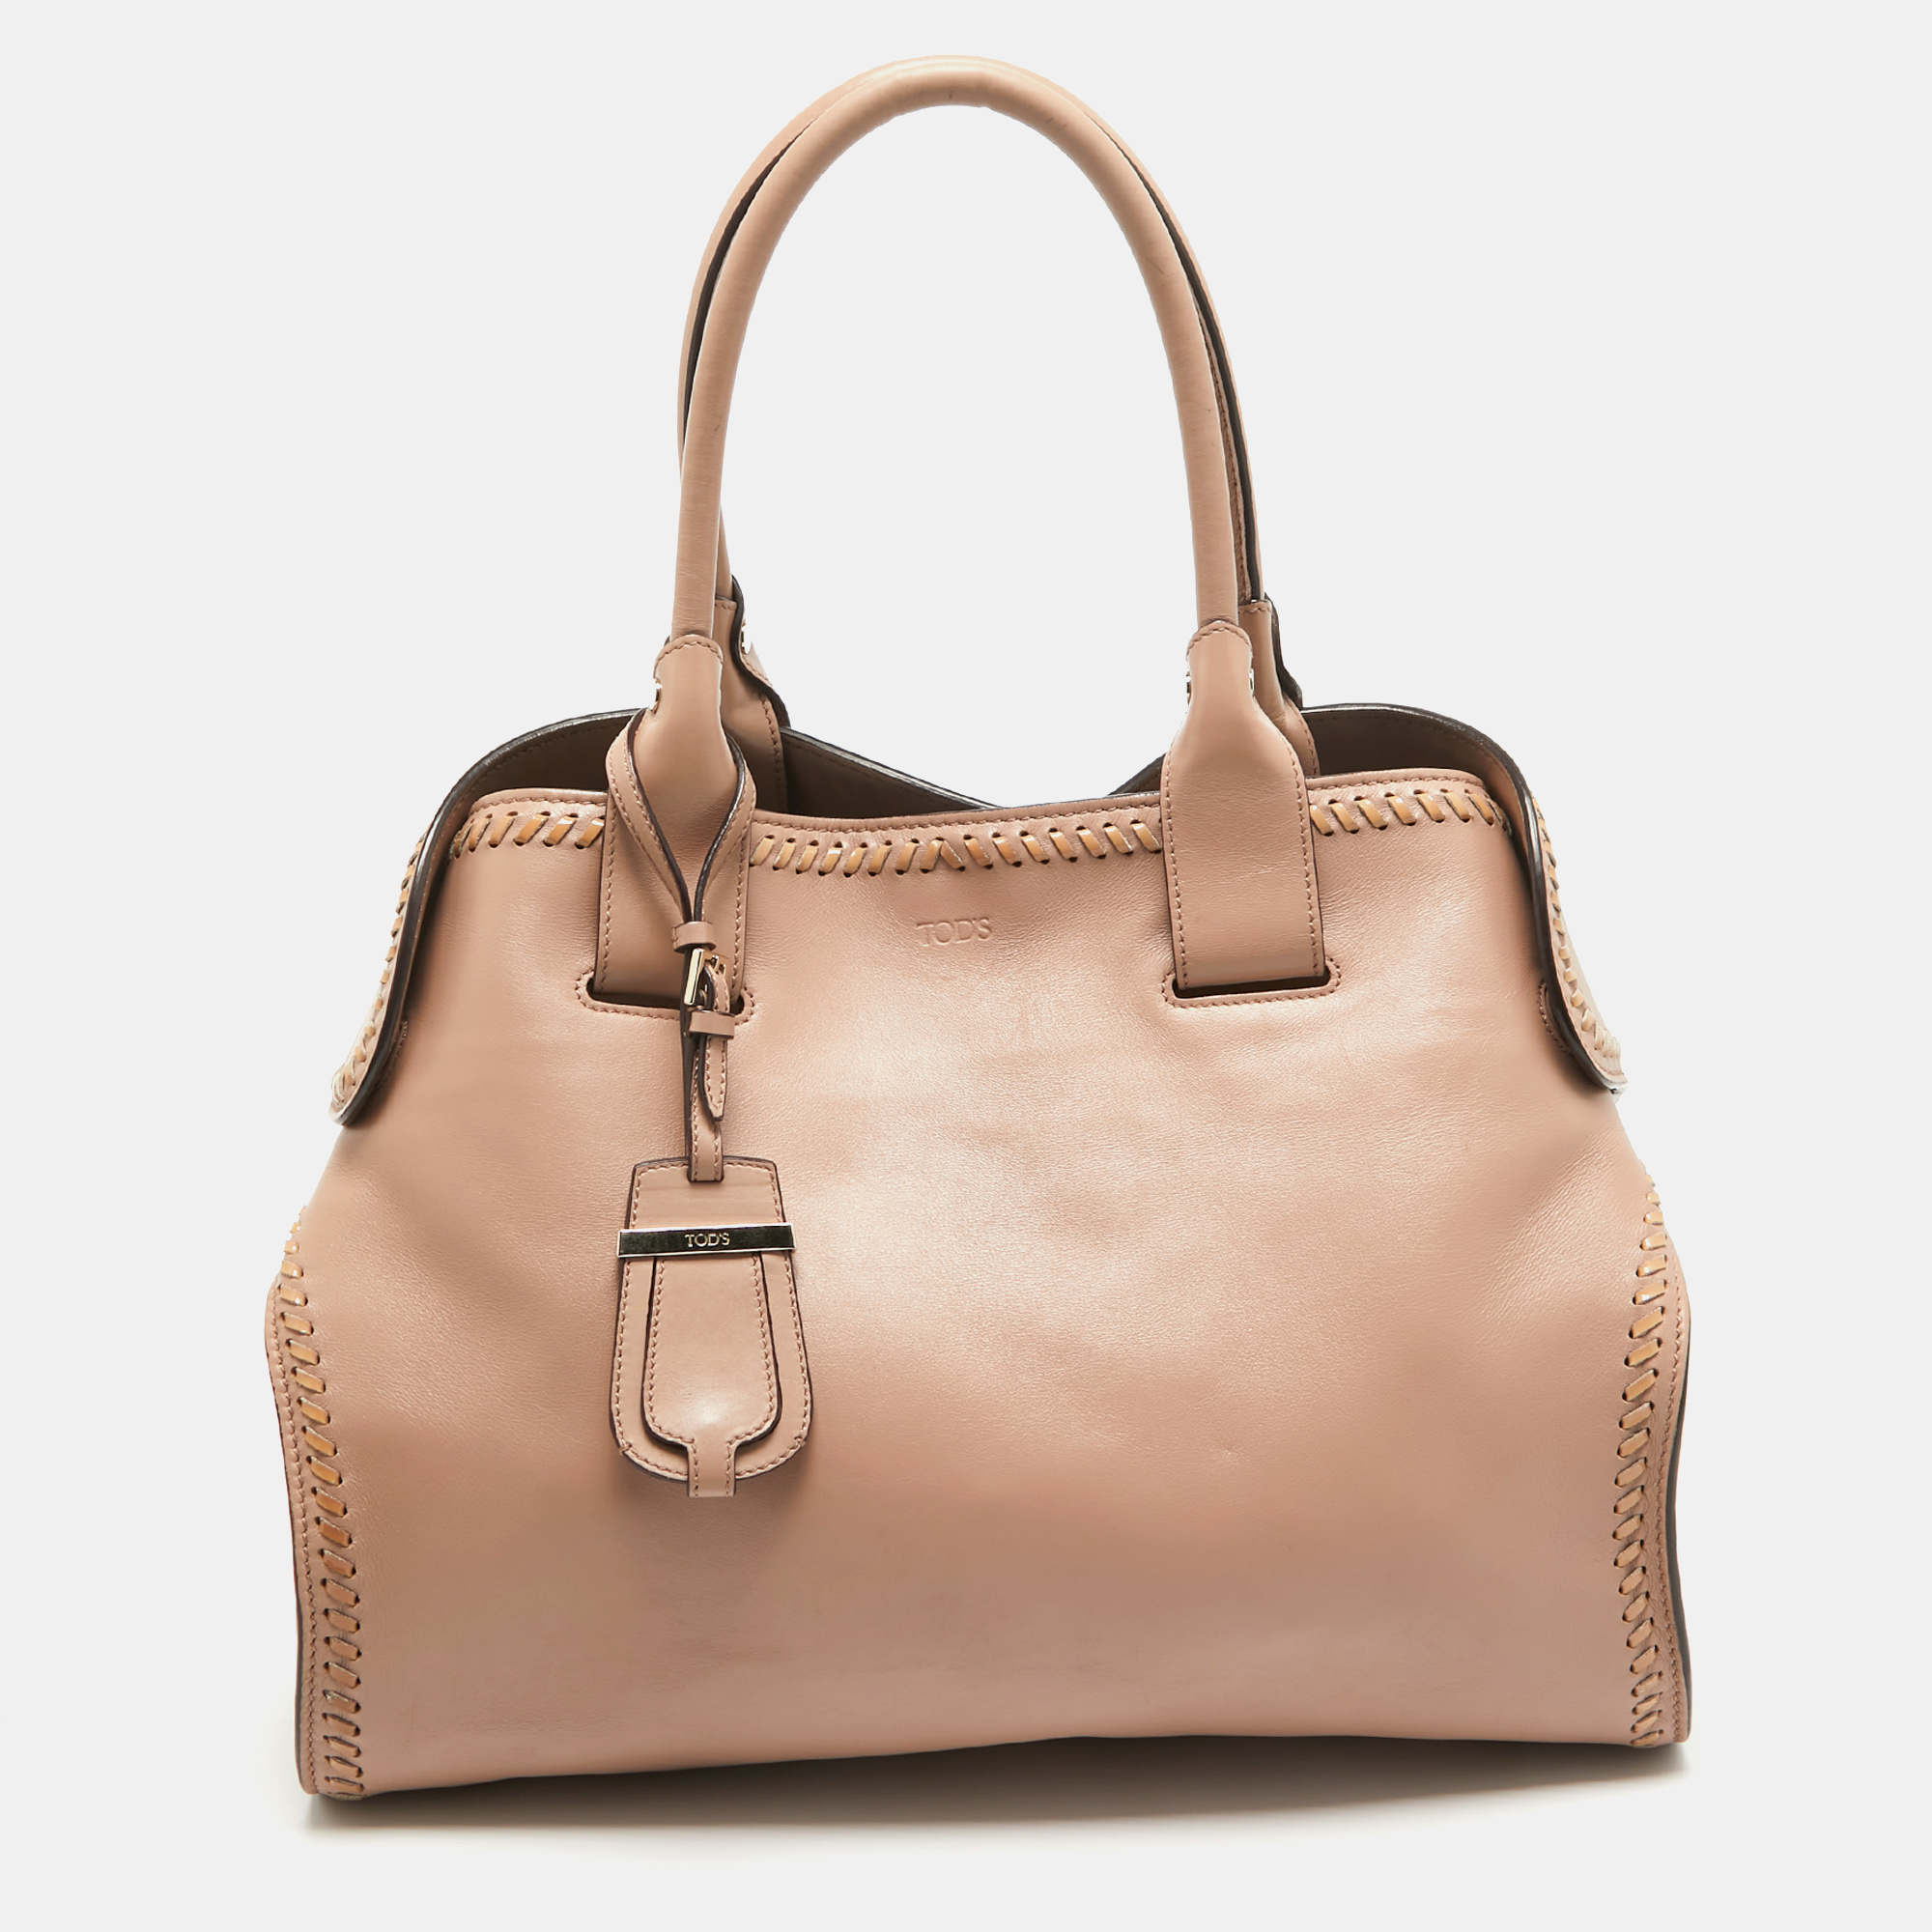 Be it your daily commute to work shopping sprees and vacations this Tods tote bag will never fail you. This designer creation is made to last and assist you in your fashion filled days.